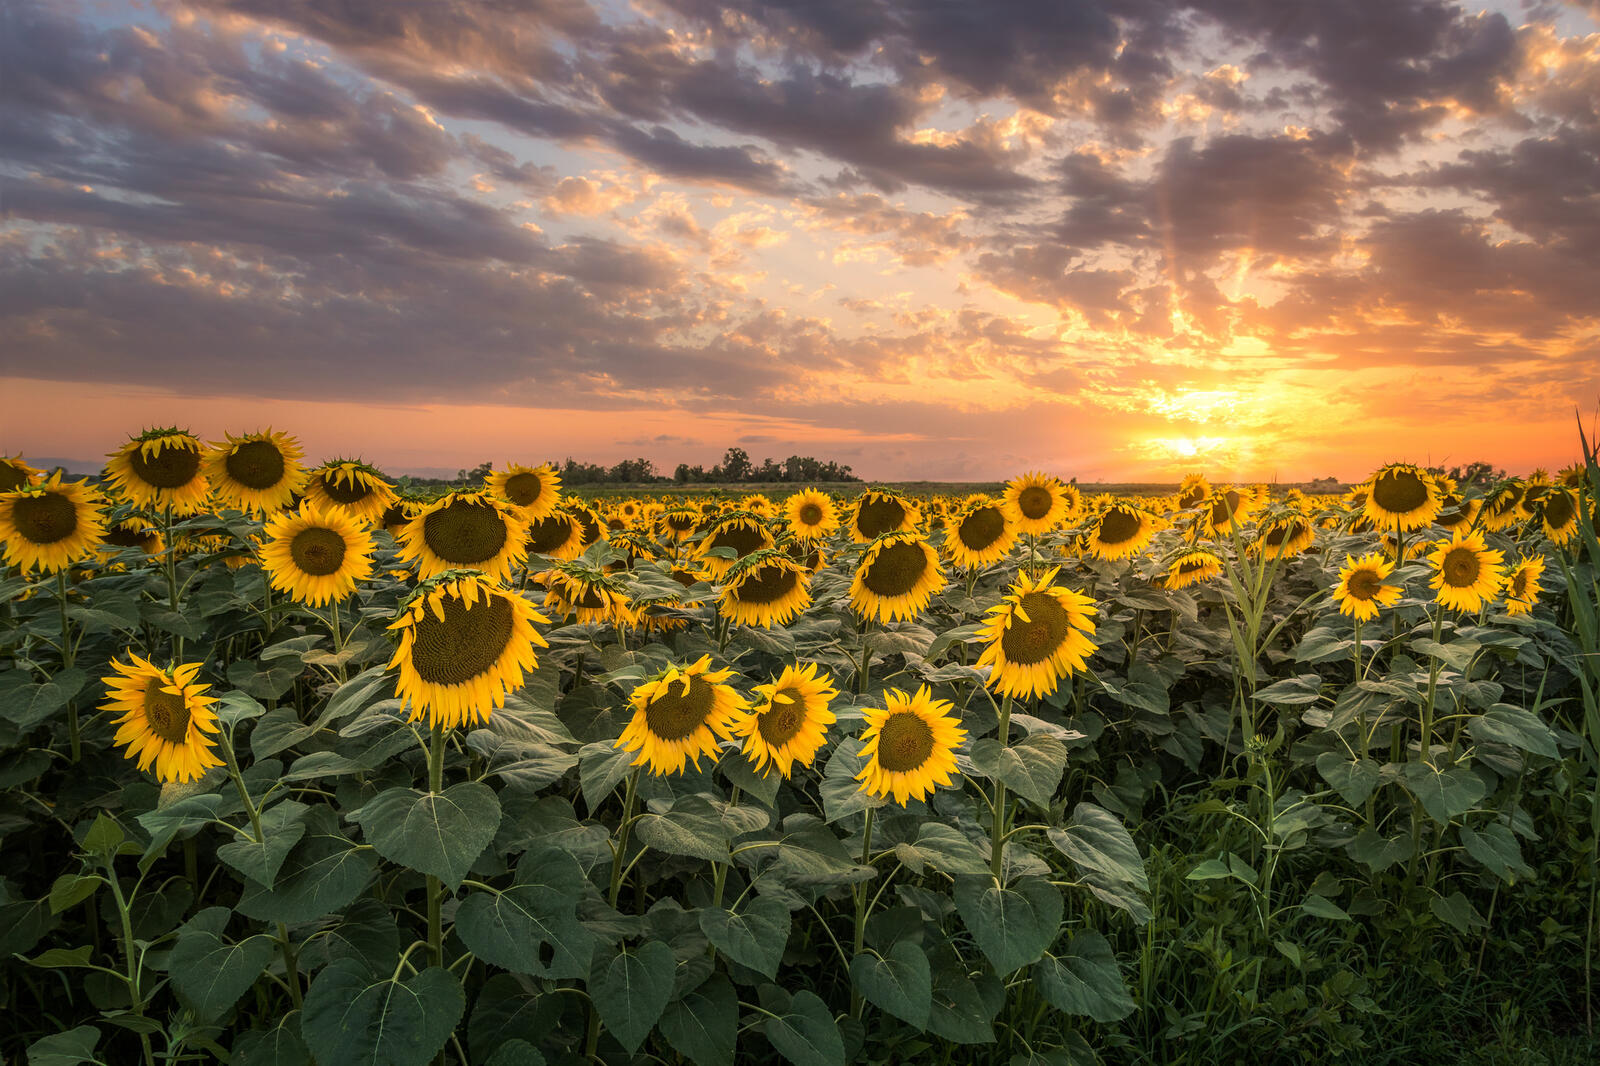 Free photo See pictures of sunsets, sunflowers